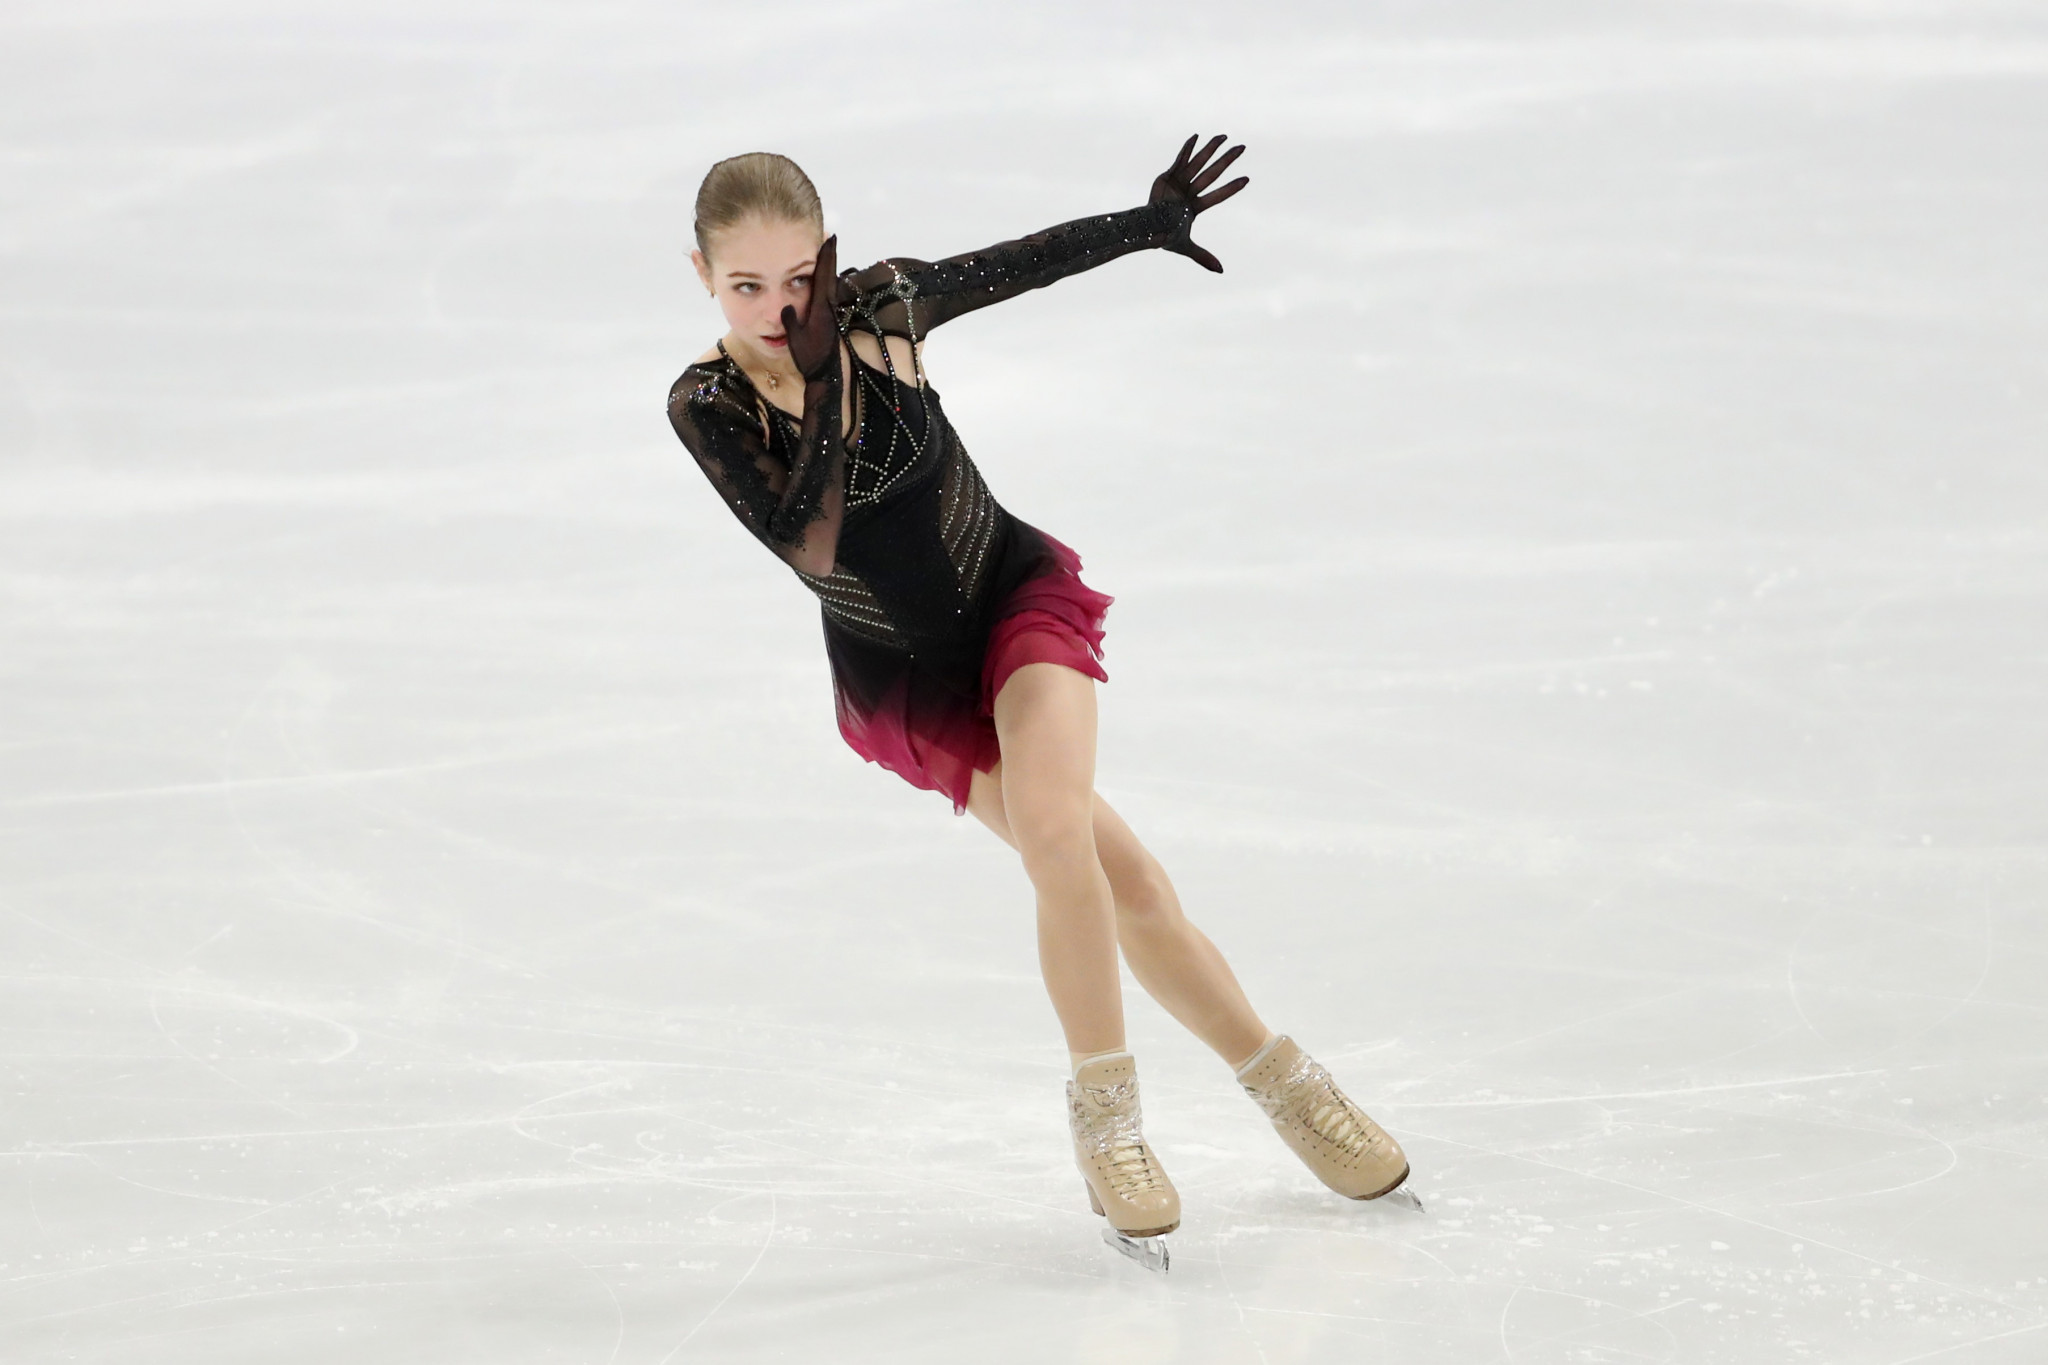 Alexandra Trusova put herself in pole position in the women's competition after an impressive routine in the short programme ©Getty Images